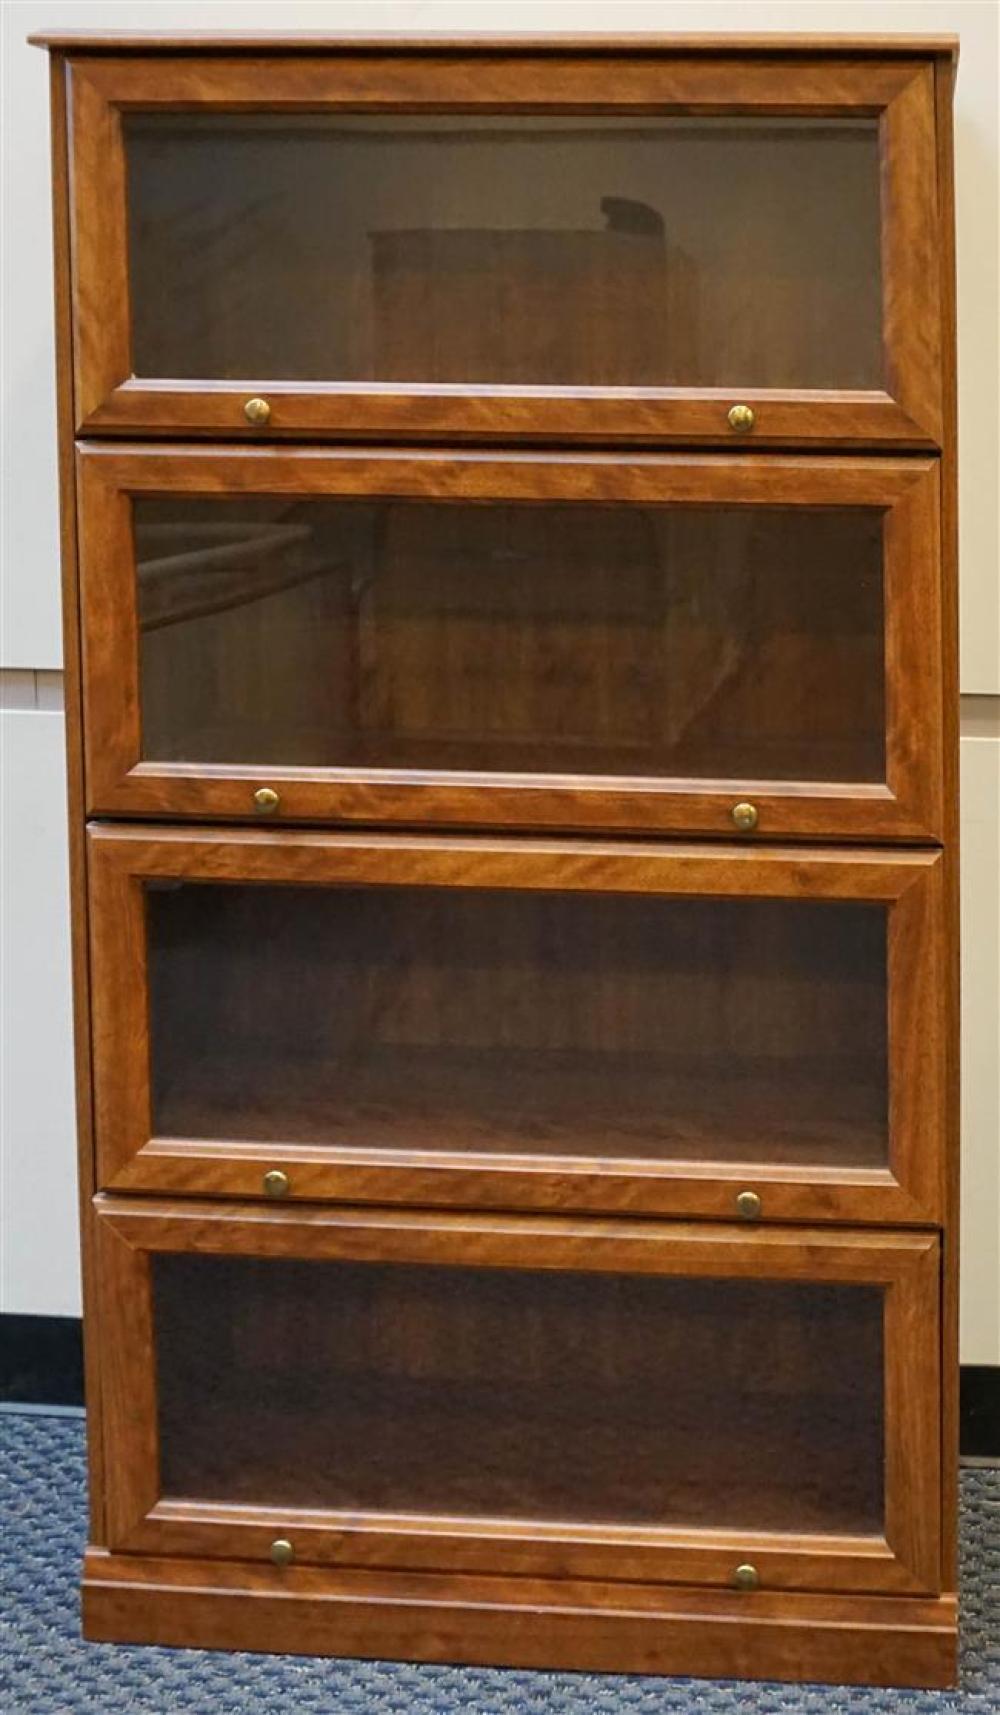 CHERRY FINISH BARRISTER STYLE BOOKCASE  323f53